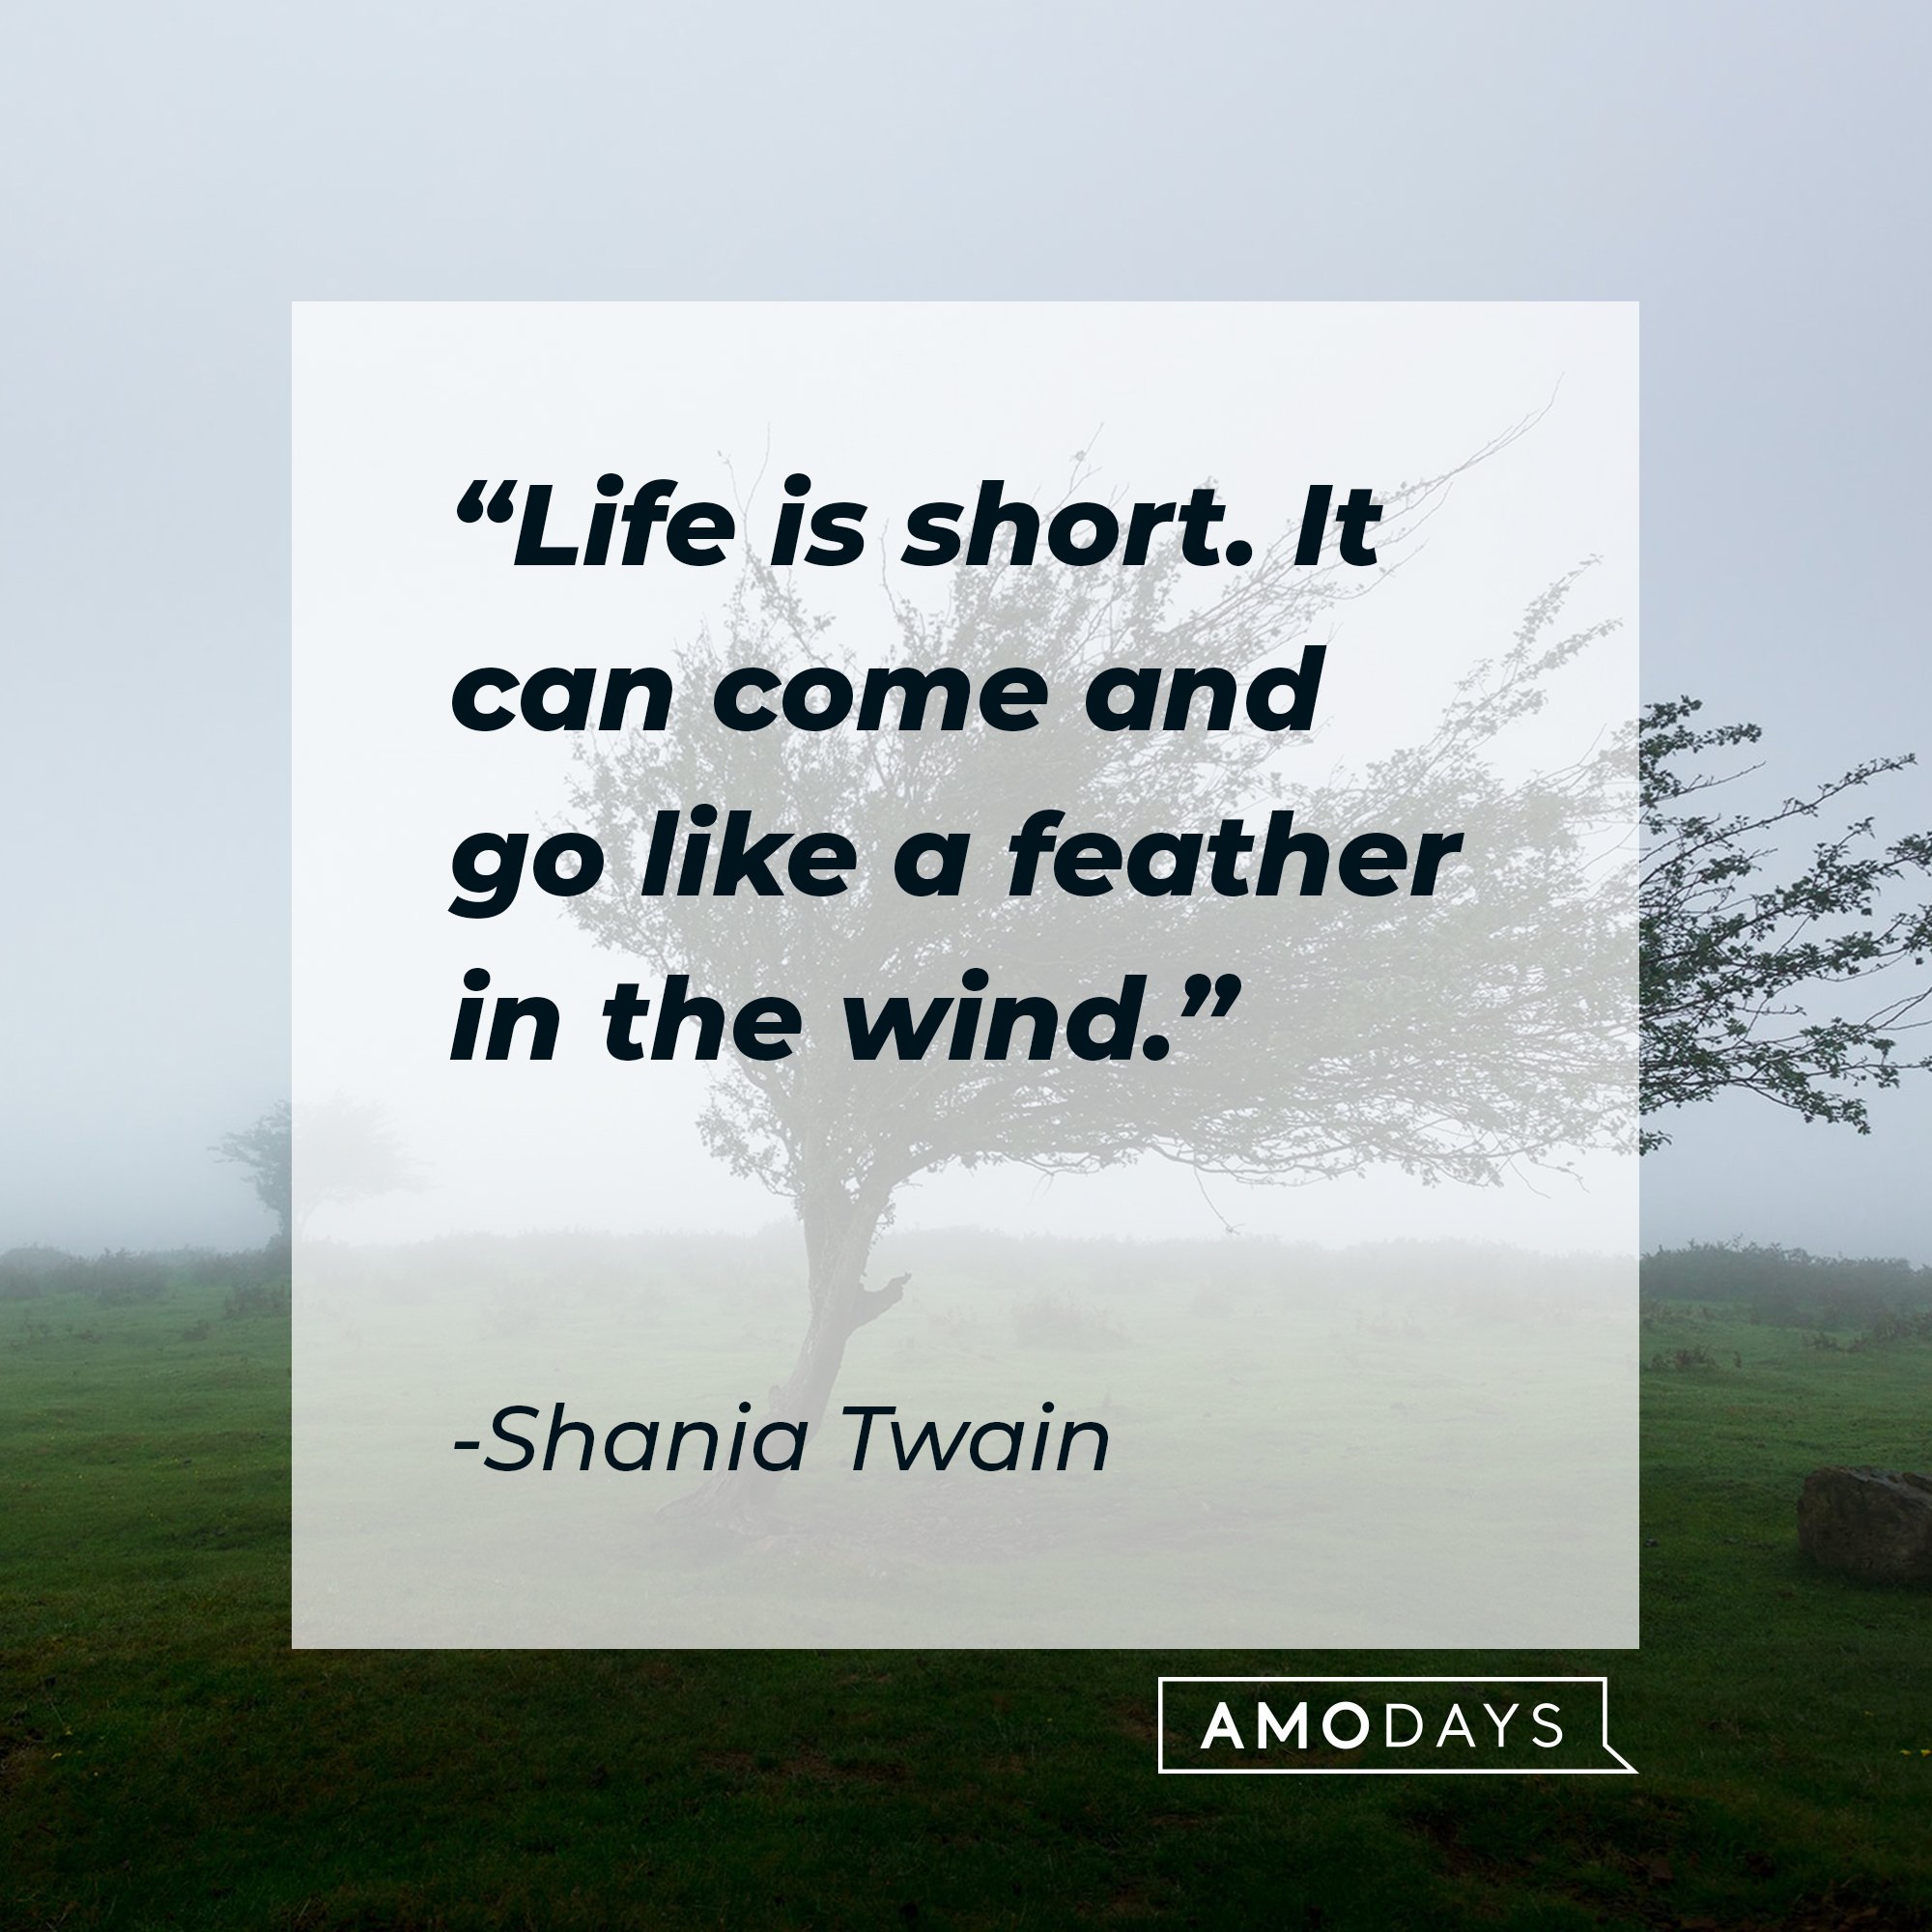 Shania Twain's quote: "Life is short. It can come and go like a feather in the wind." | Image: AmoDays